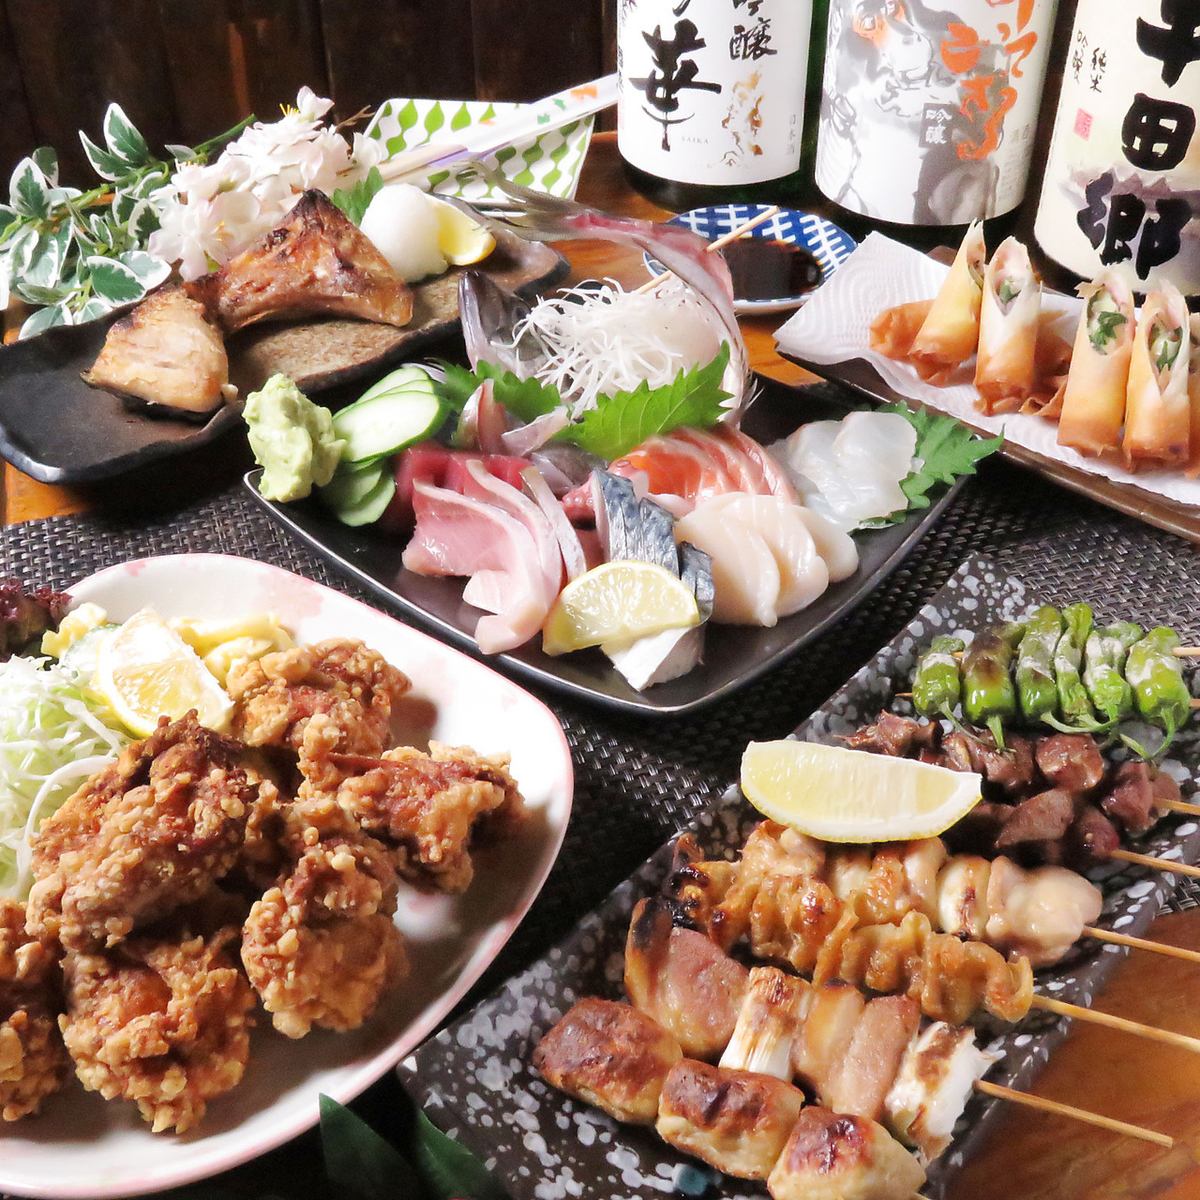 About a 3-minute walk from Aoyama Station! Recommended for a little drink with a wide variety of dishes! A hidden izakaya at Aoyama Station ♪